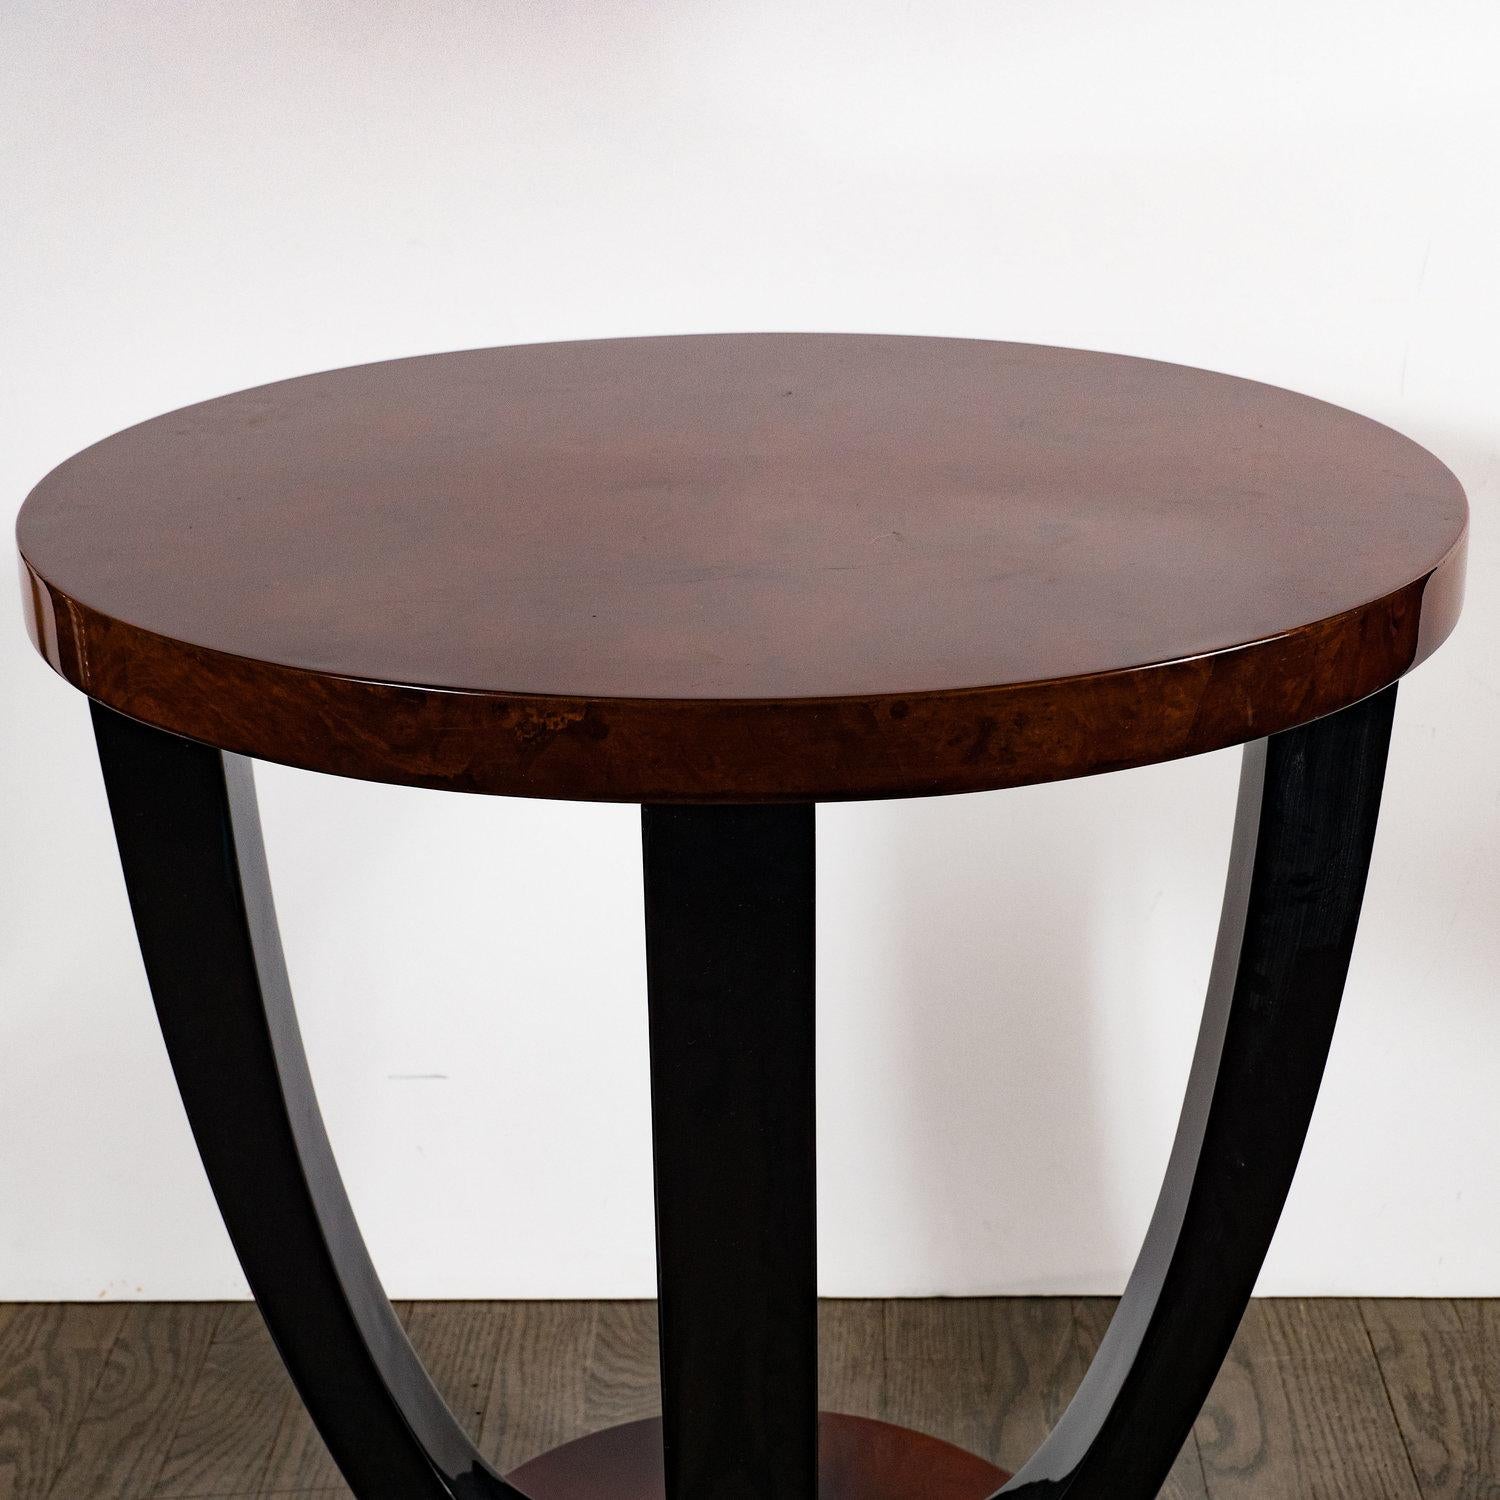 Mid-20th Century French Art Deco Two-Tiered Bookmatched Walnut and Black Lacquer Gueridon Table